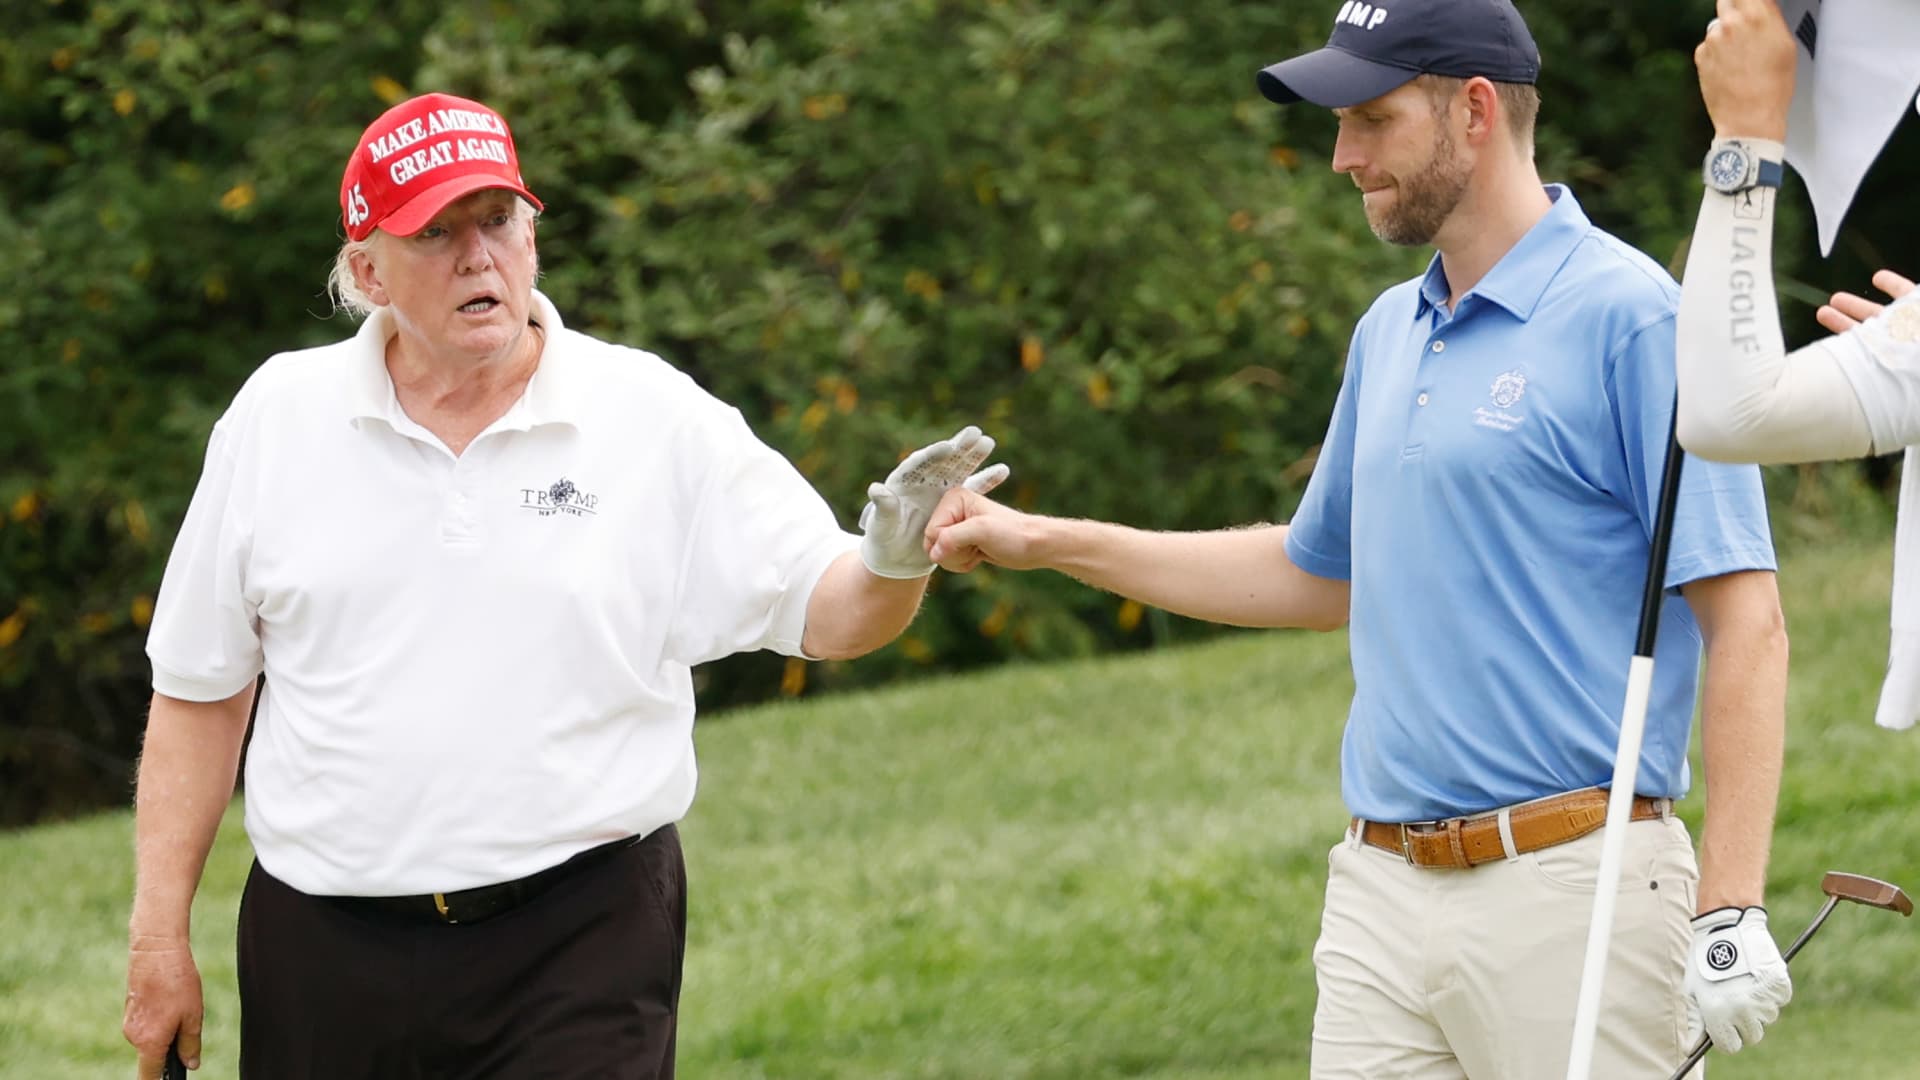 Former U.S. President Donald Trump and son Eric Trump react to his putt on the 14th green during the pro-am prior to the LIV Golf Invitational - Bedminster at Trump National Golf Club Bedminster on July 28, 2022 in Bedminster, New Jersey.